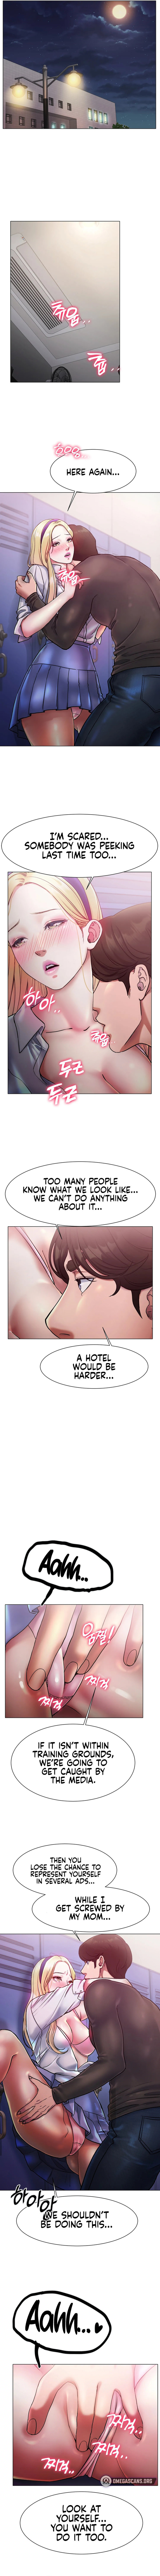 Ice Love - Chapter 3 Page 4